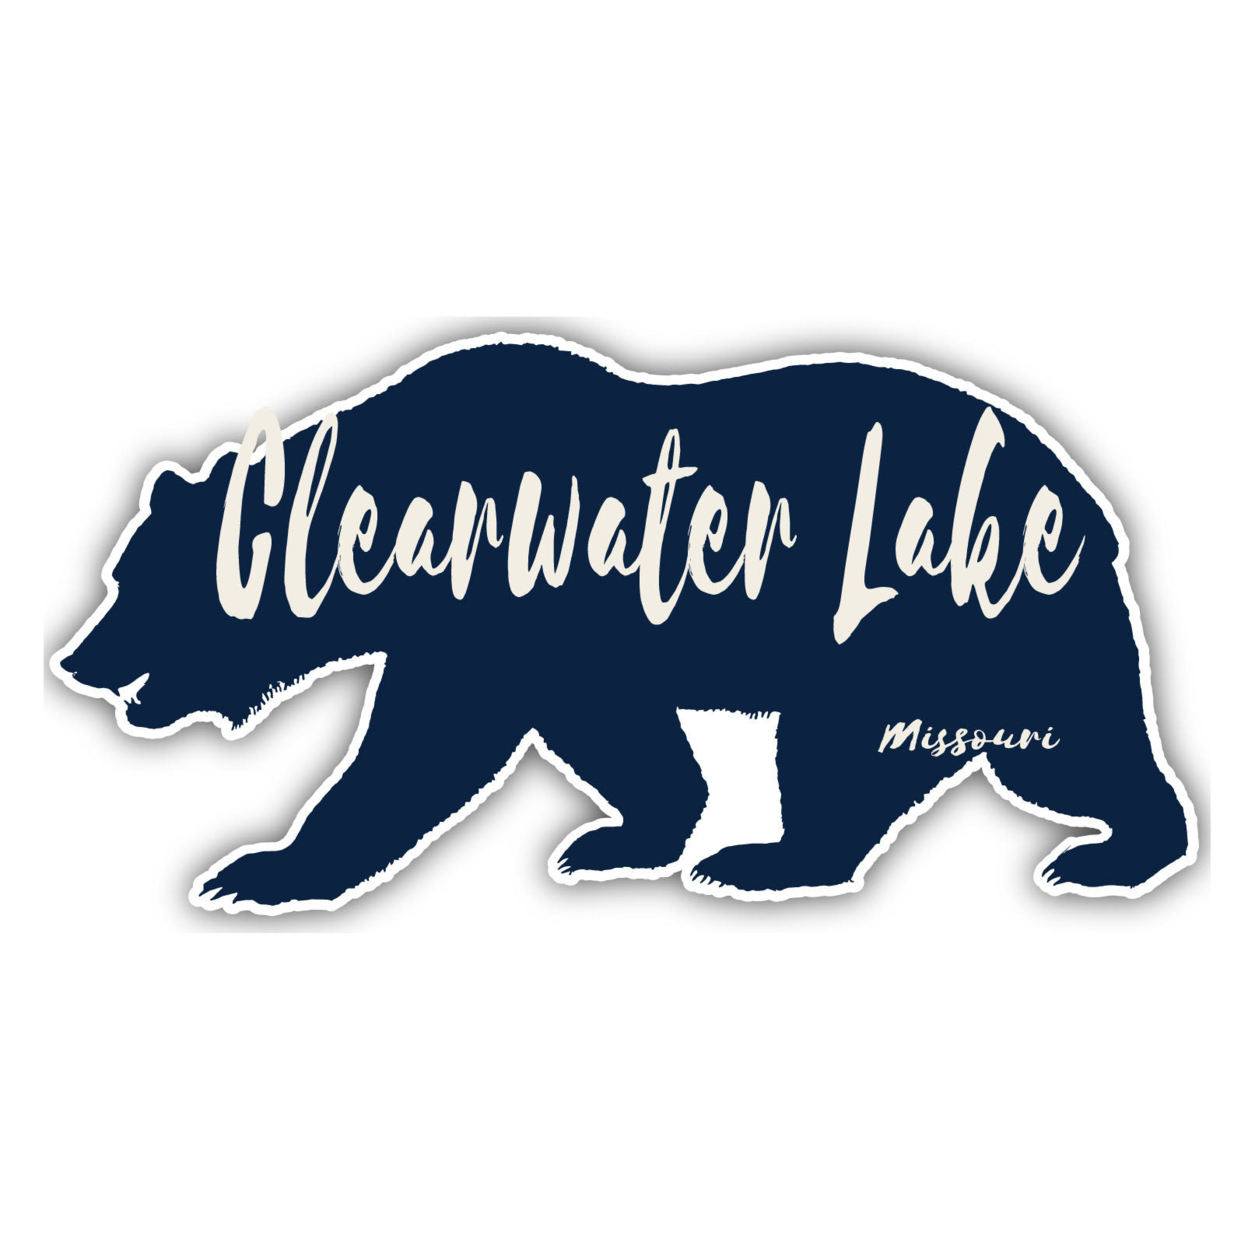 Clearwater Lake Missouri Souvenir Decorative Stickers (Choose Theme And Size) - 4-Pack, 6-Inch, Bear